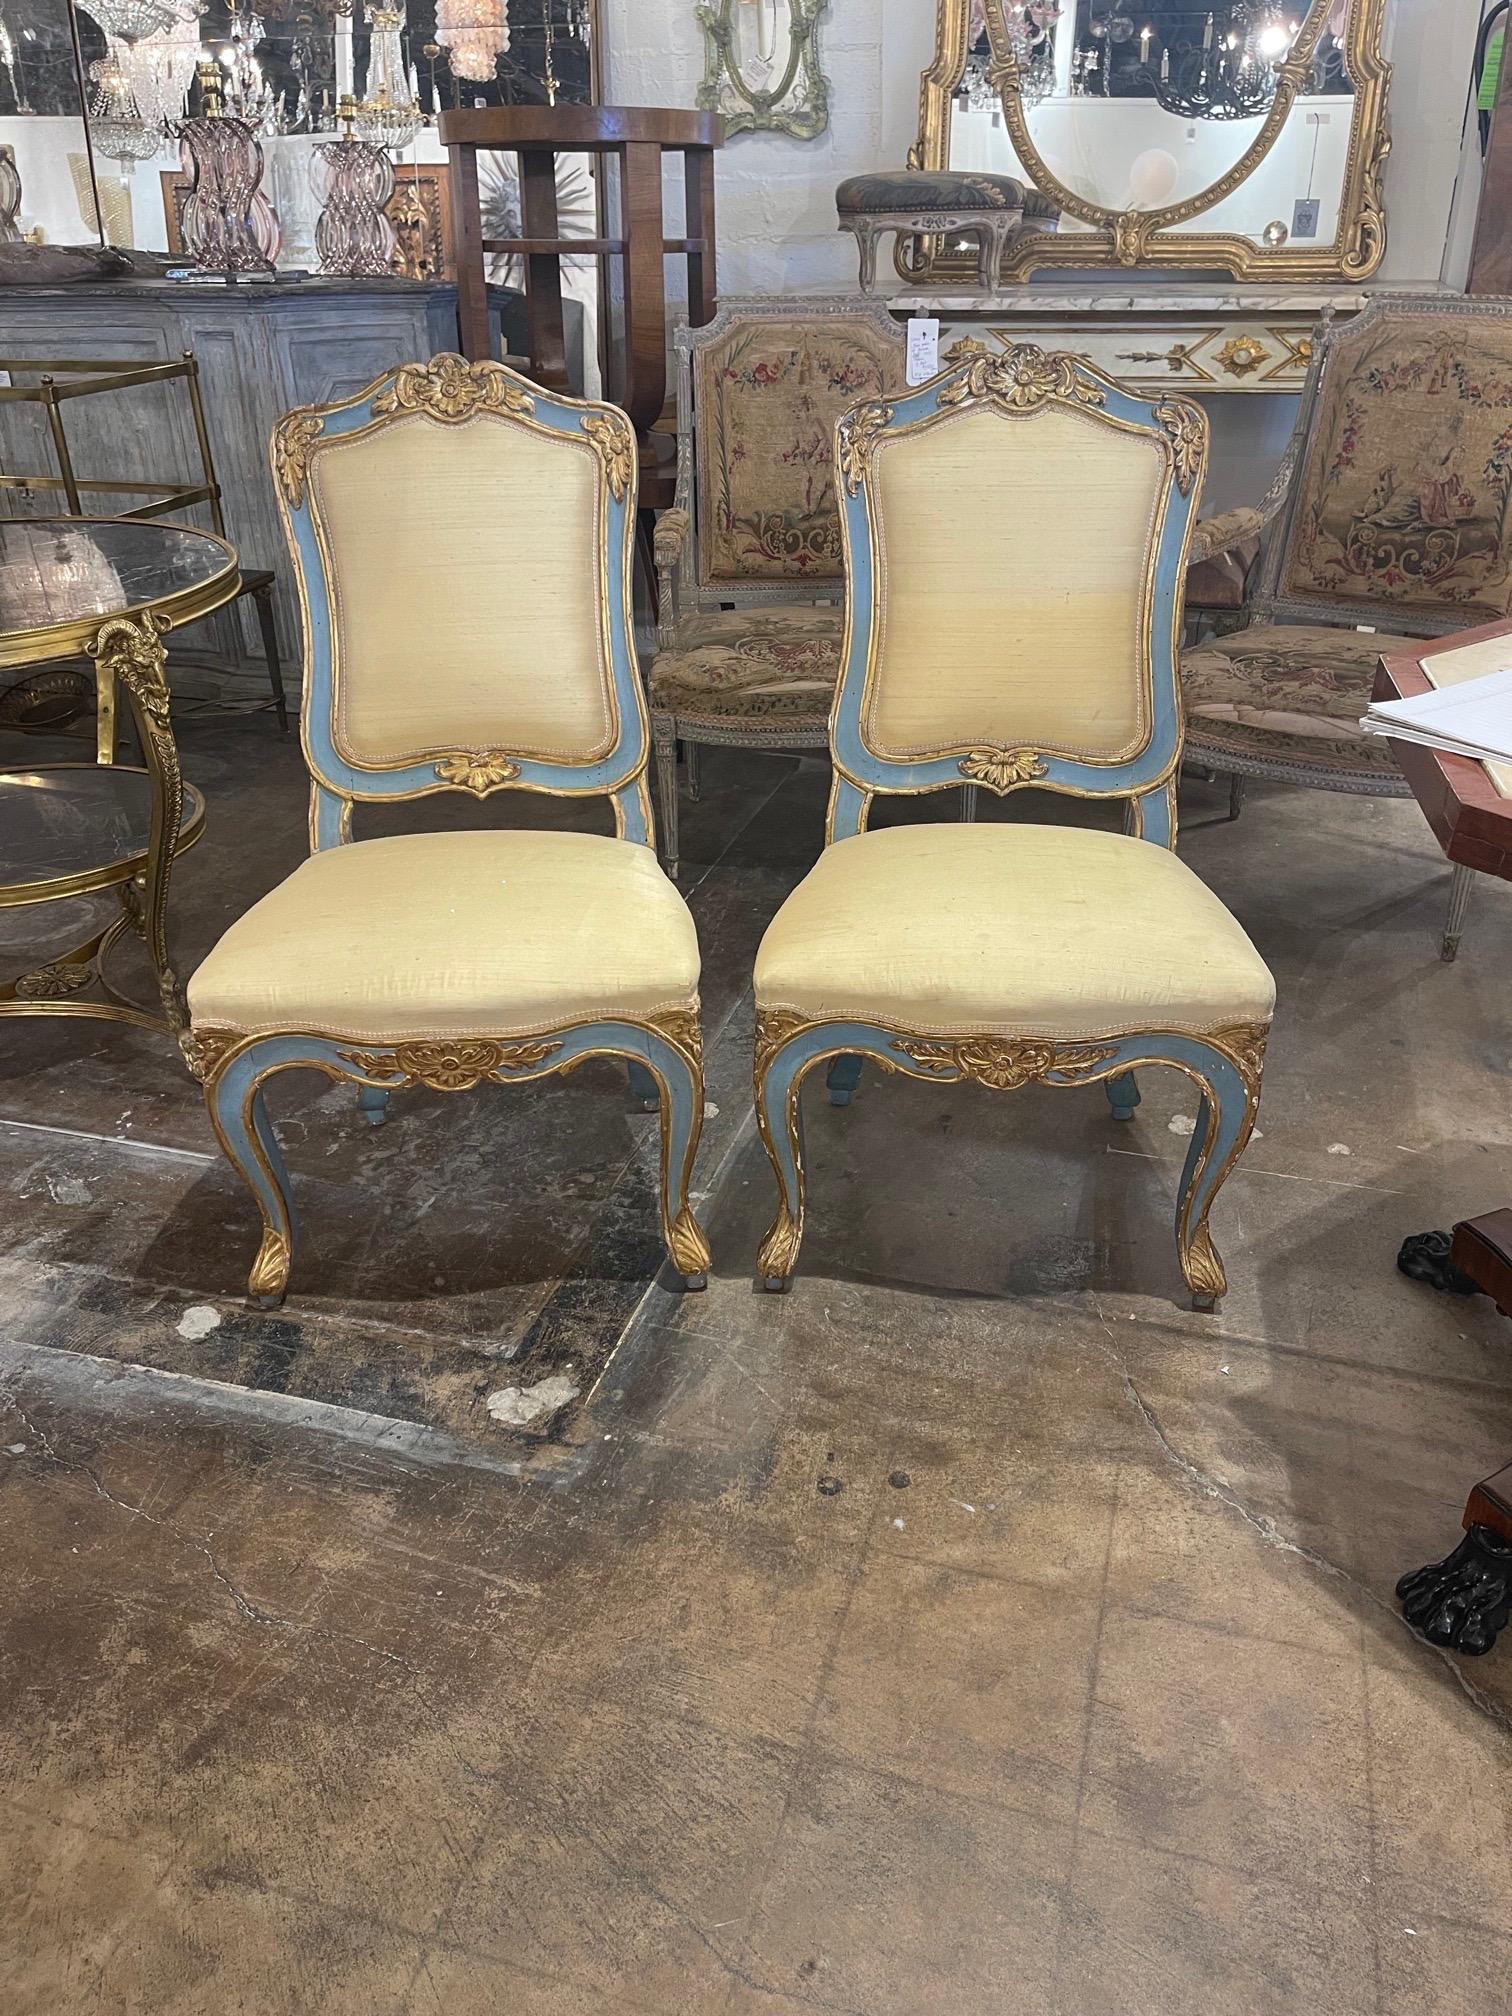 Lovely pair of Italian upholstered parcel gilt side chairs. Pretty carvings and upholstery. A beautiful design element!